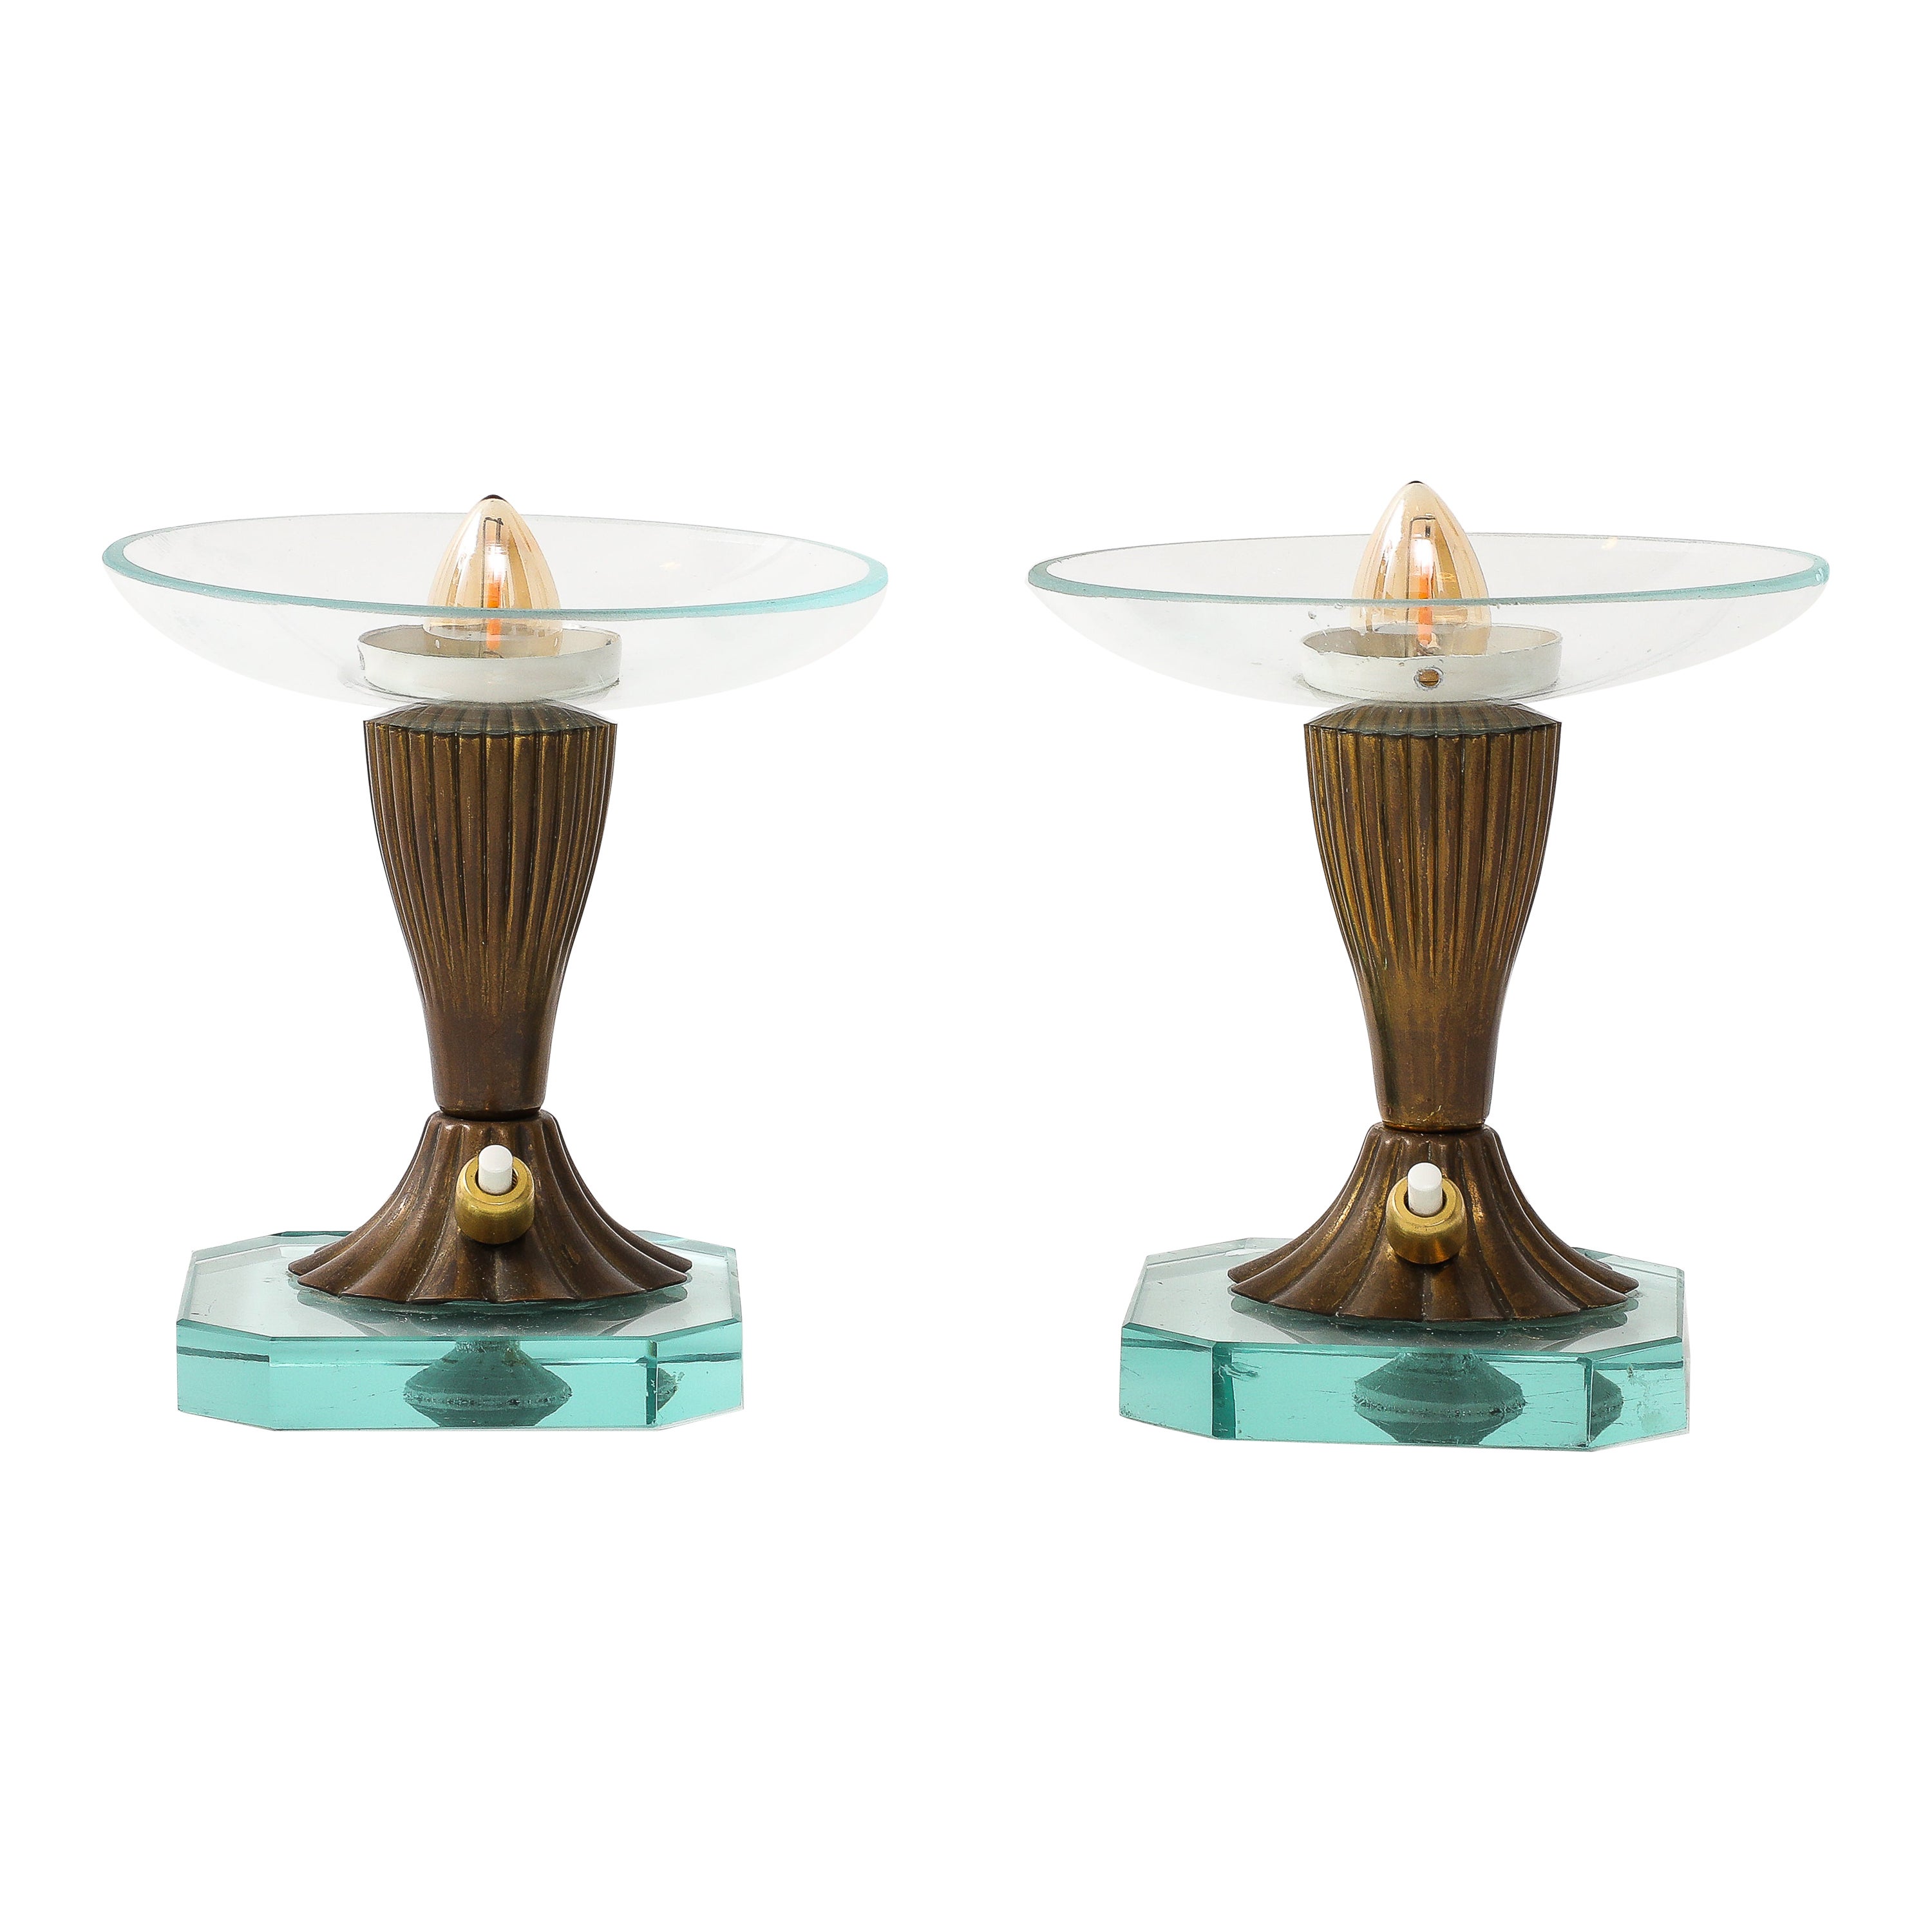 Pair of Glass & Brass Petite Table Lamps att. Pietro Chiesa - Italy 1940's For Sale